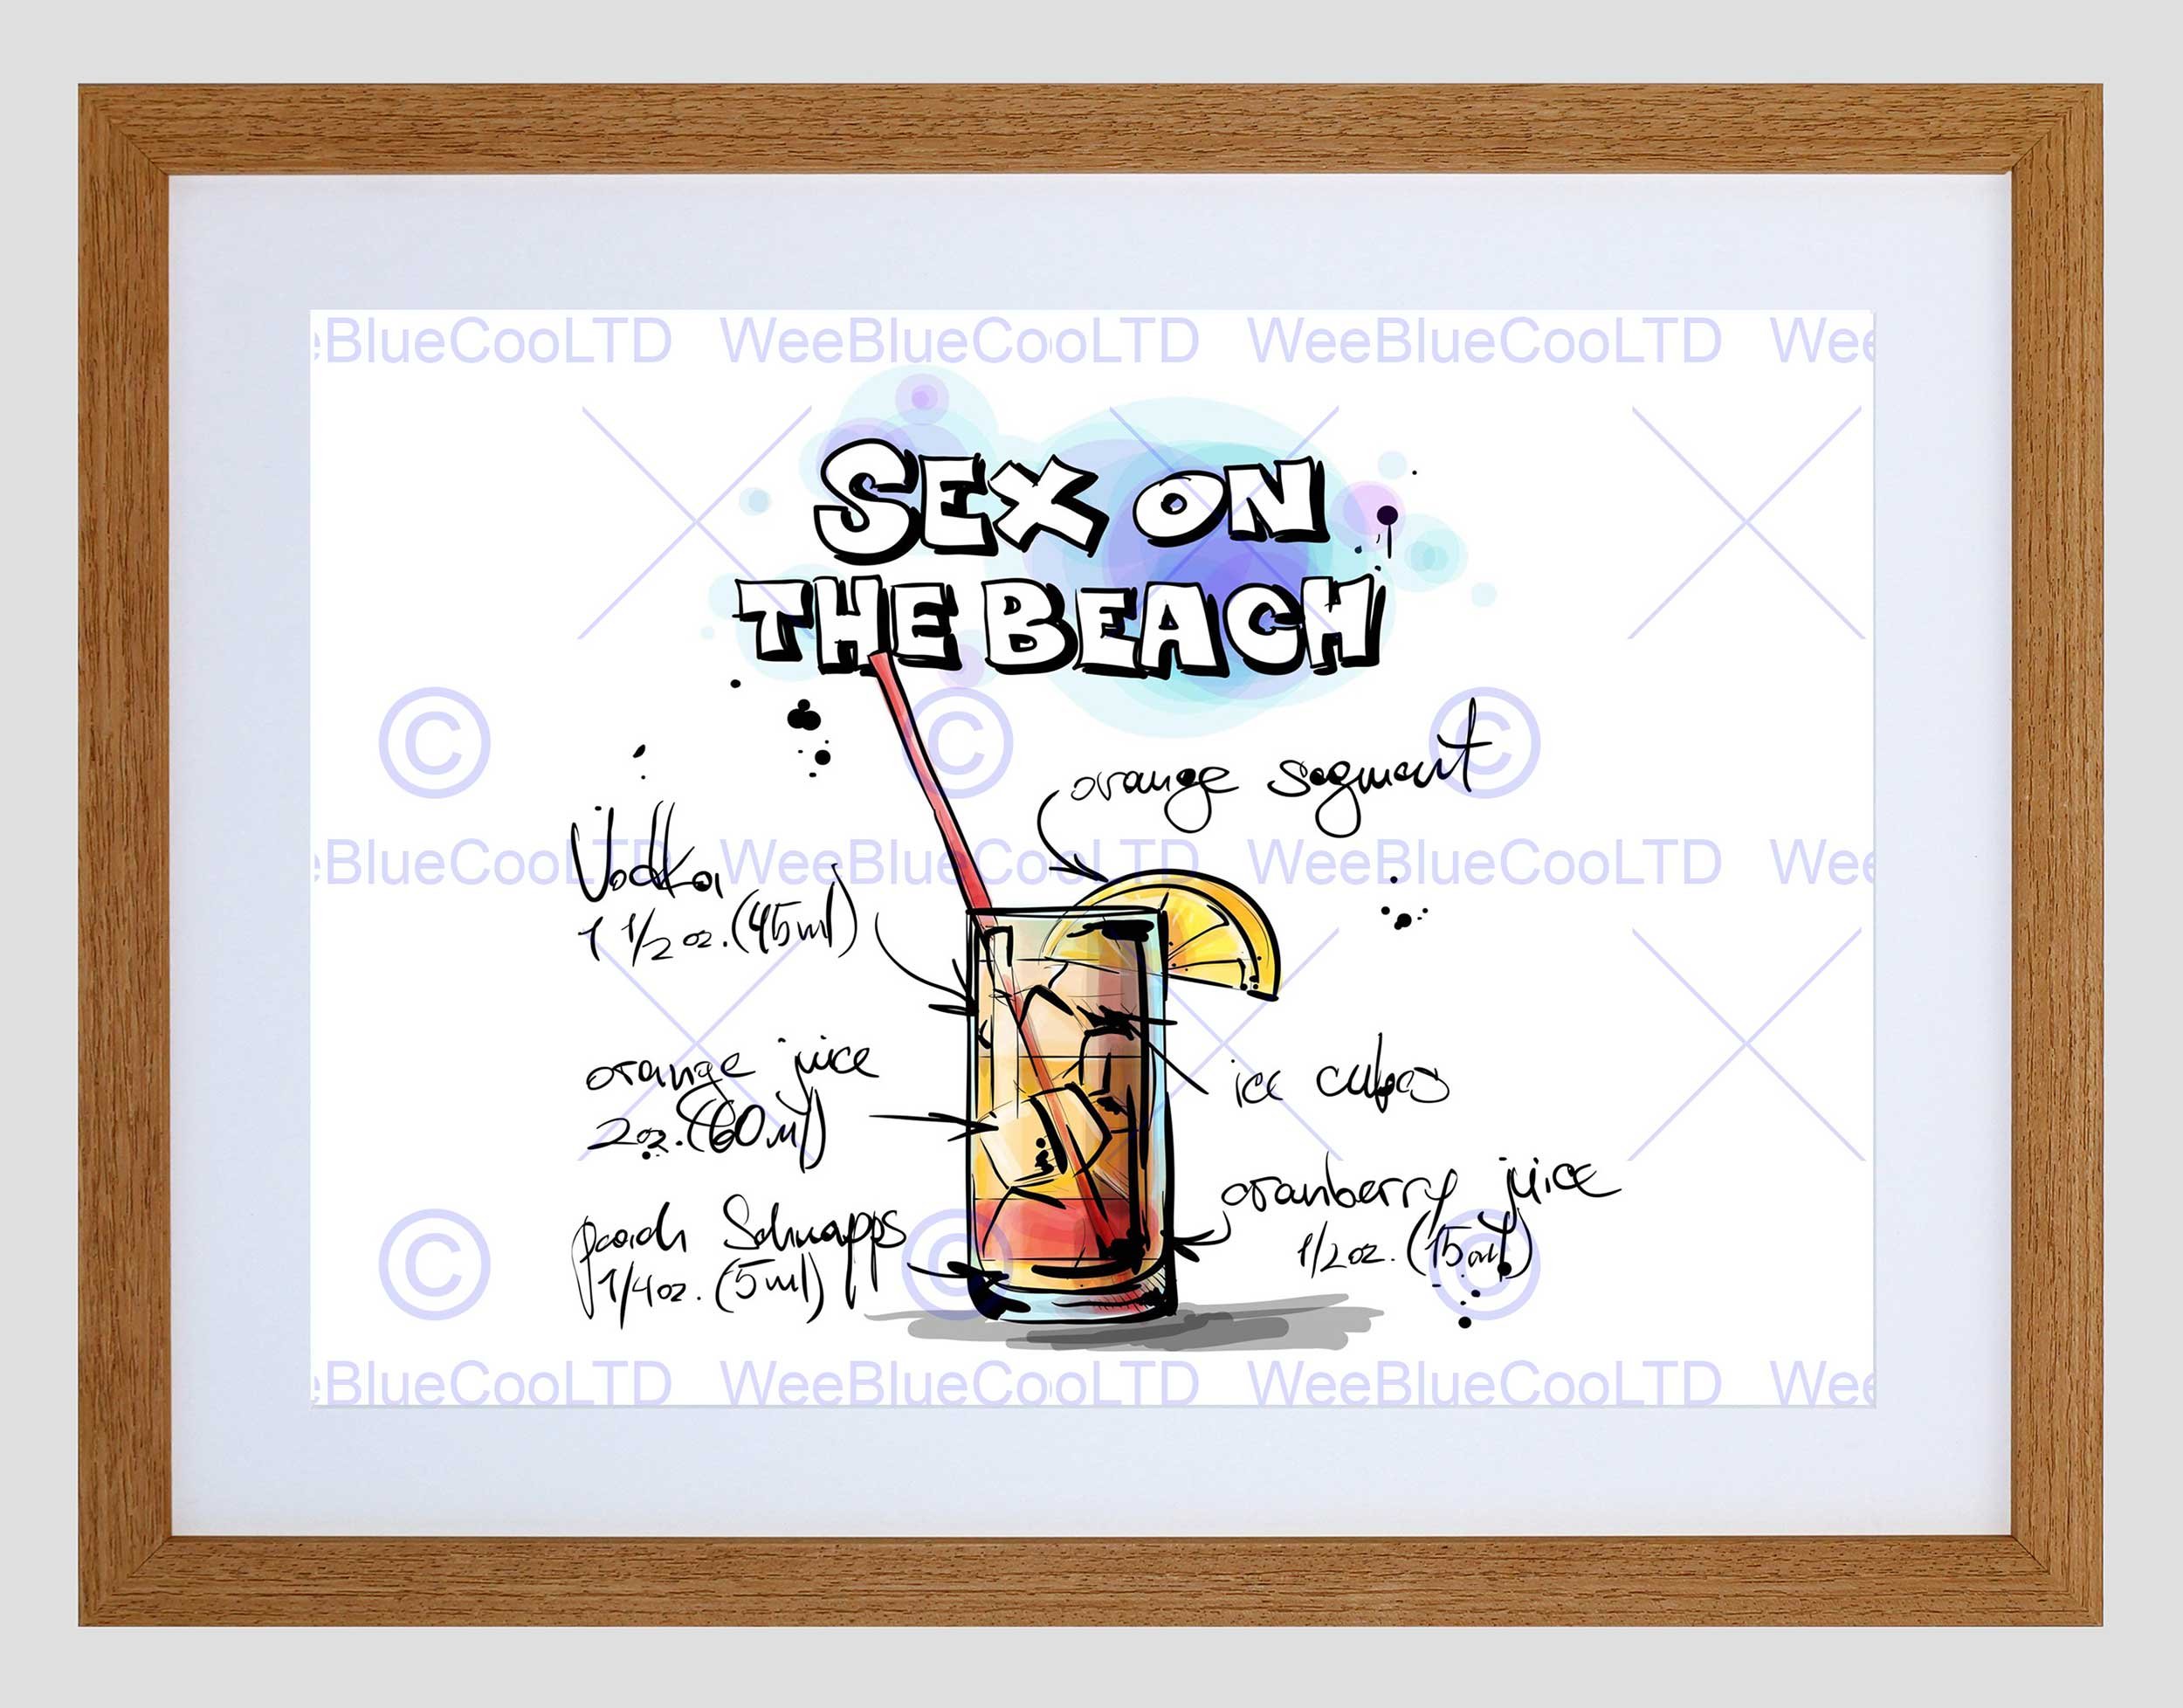 PAINTING ALCOHOL COCKTAIL RECIPE SEX ON THE BEACH FRAMED ART PRINT B12X13489